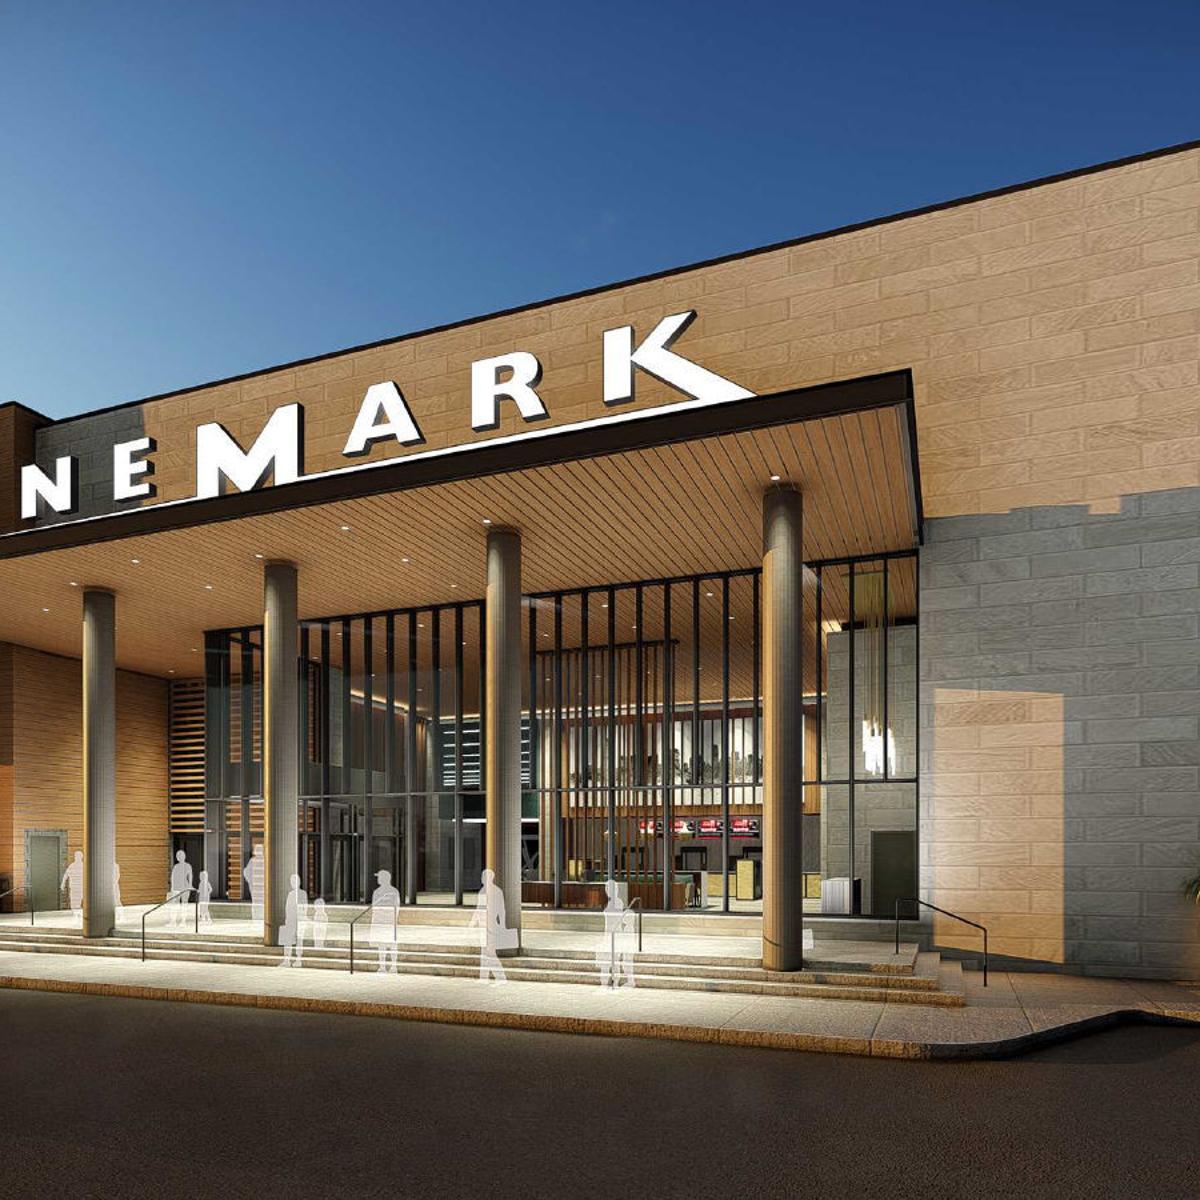 Cinemark Confirms Plans To Build 14-screen Theater In Waco Business News Wacotribcom